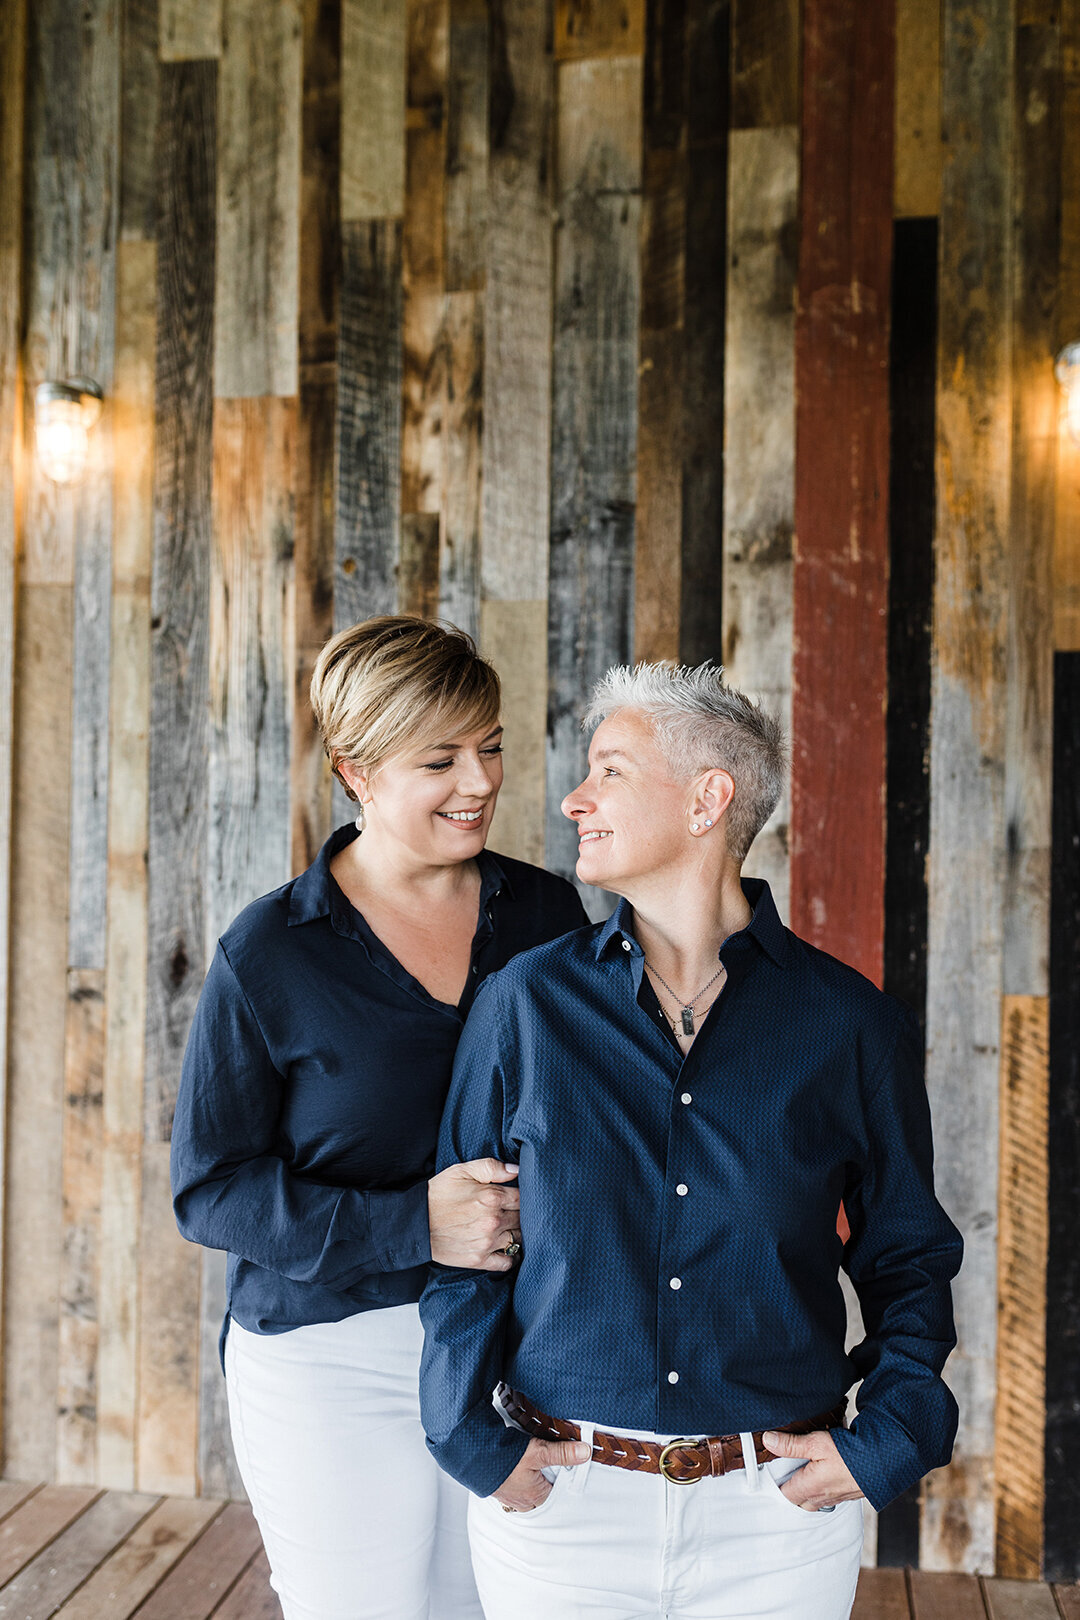 A lesbian couple standing close together and smiling at each other in front of a wood paneled wall during their engagement session in Fort Worth, Texas. They are both wearing navy blouses and white pants.